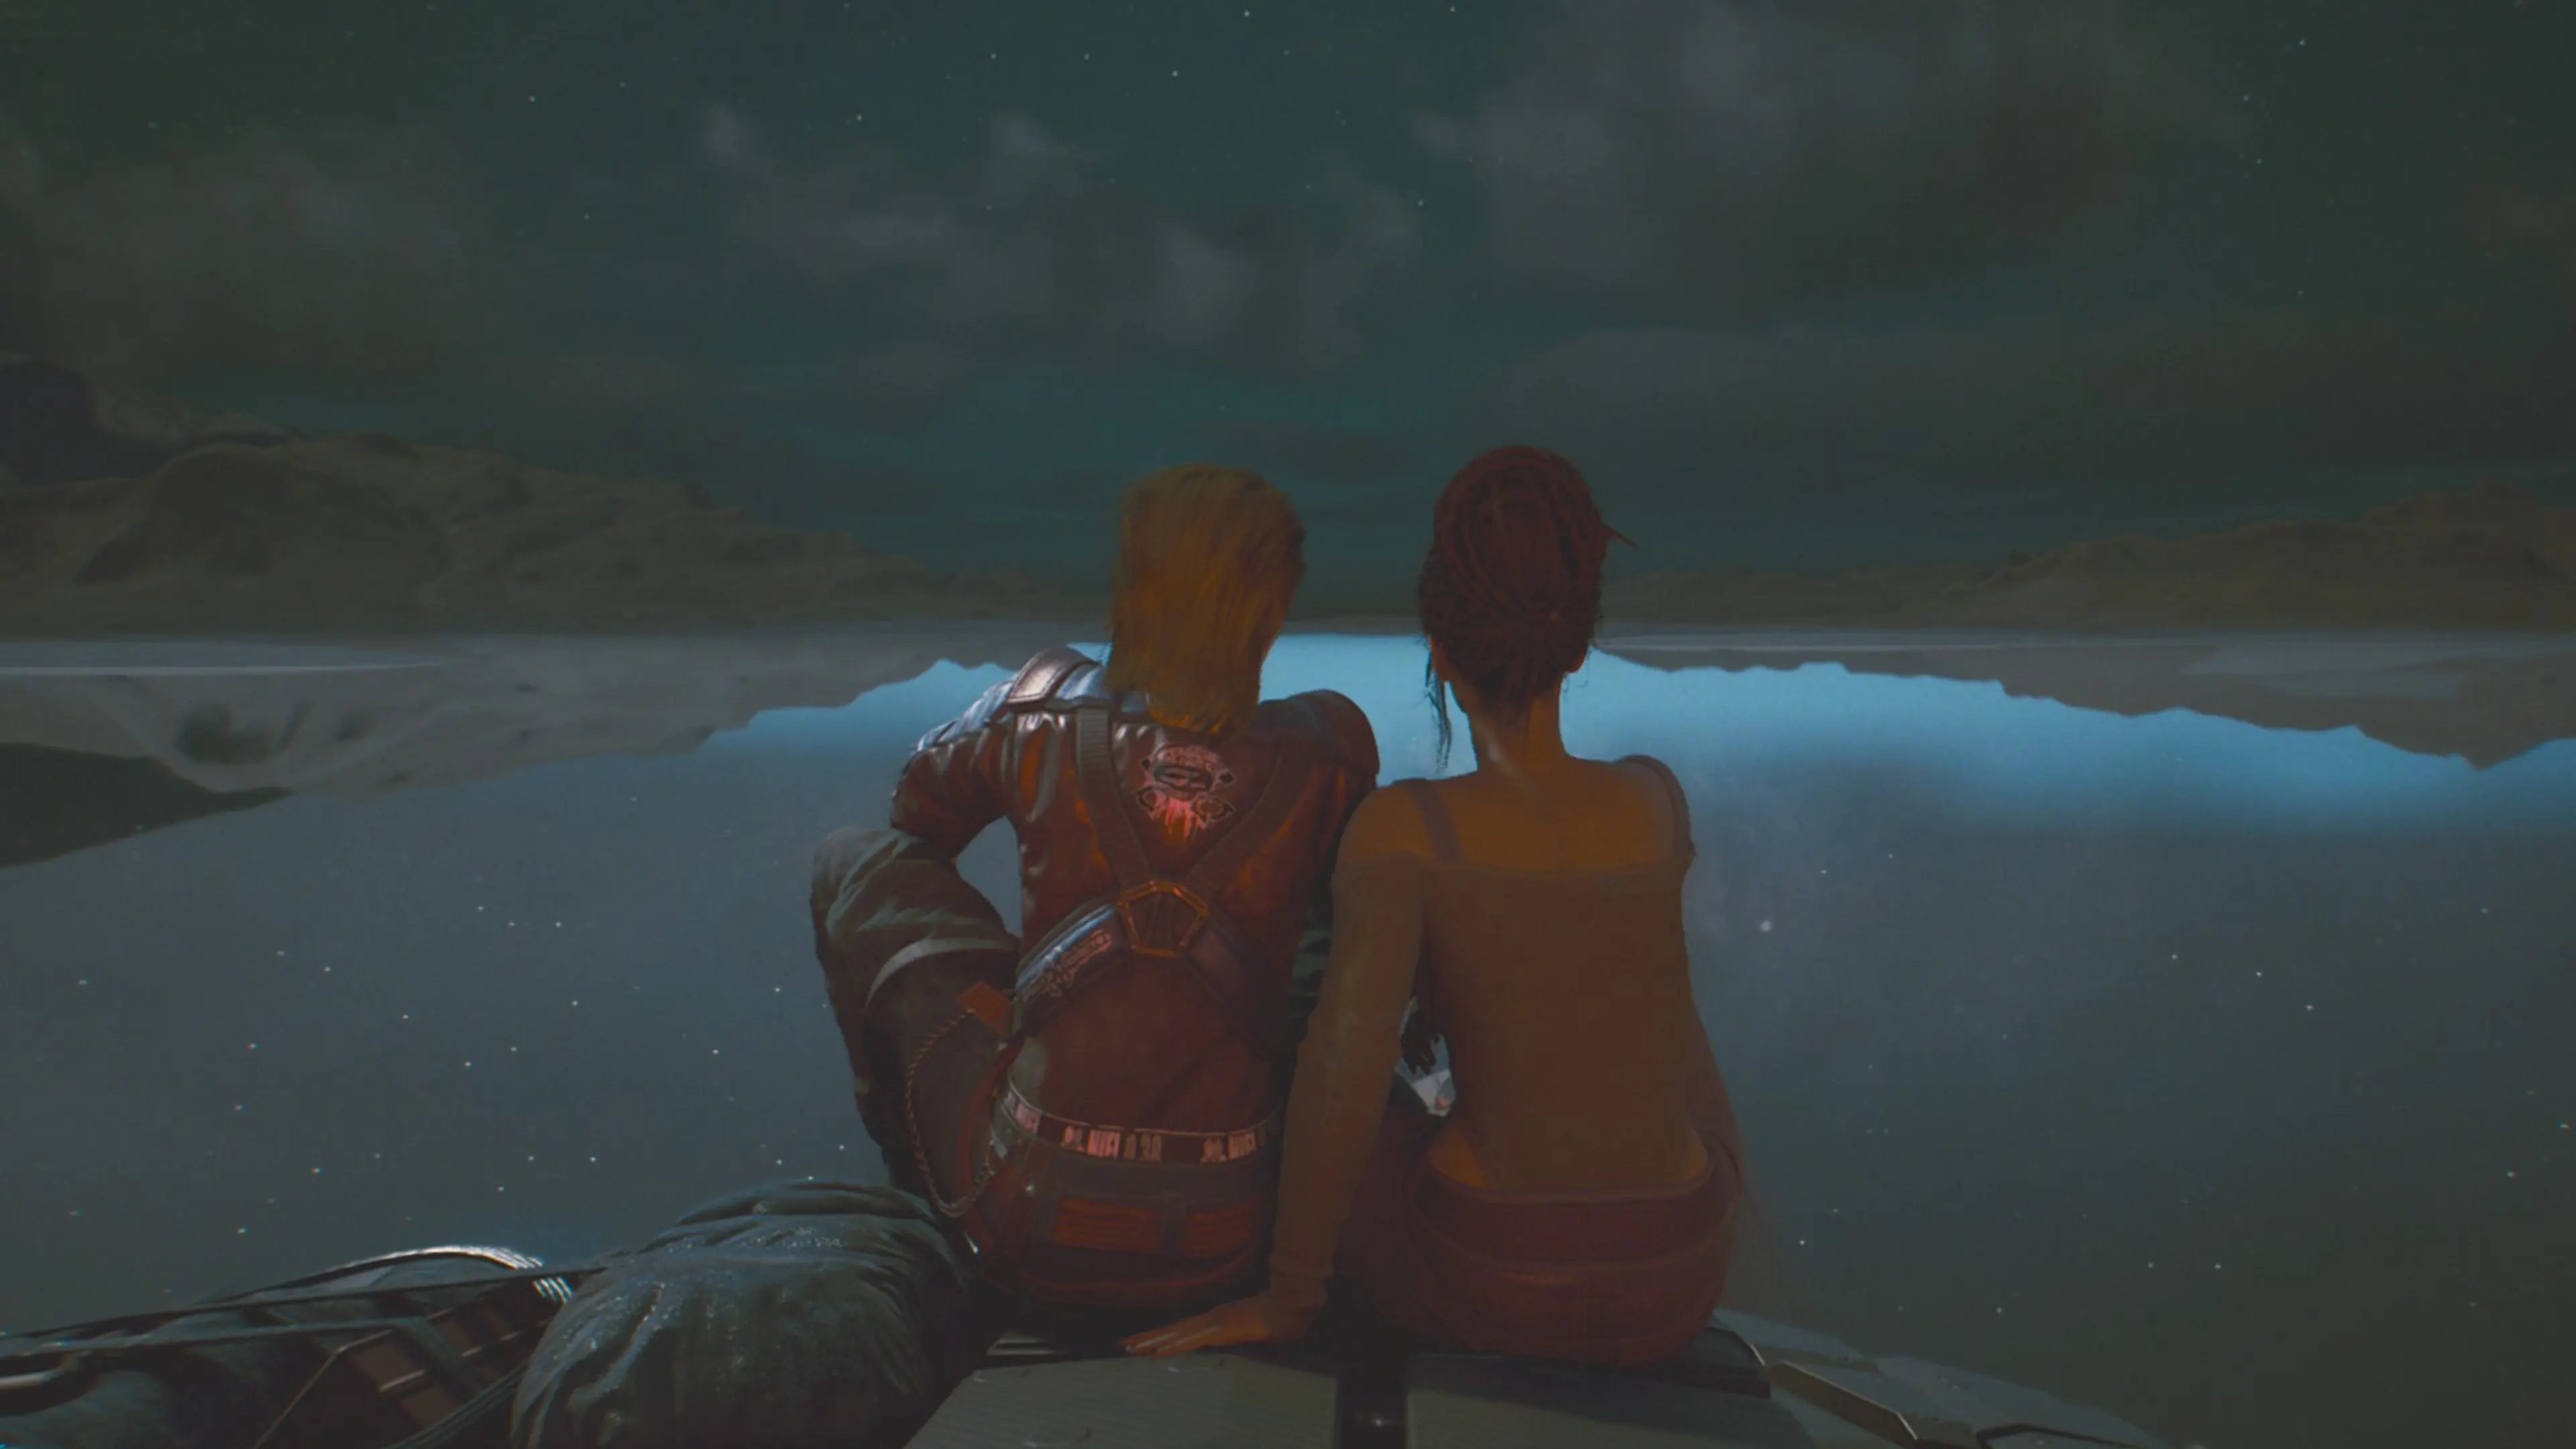 Screenshot of the game: A photo with a wife